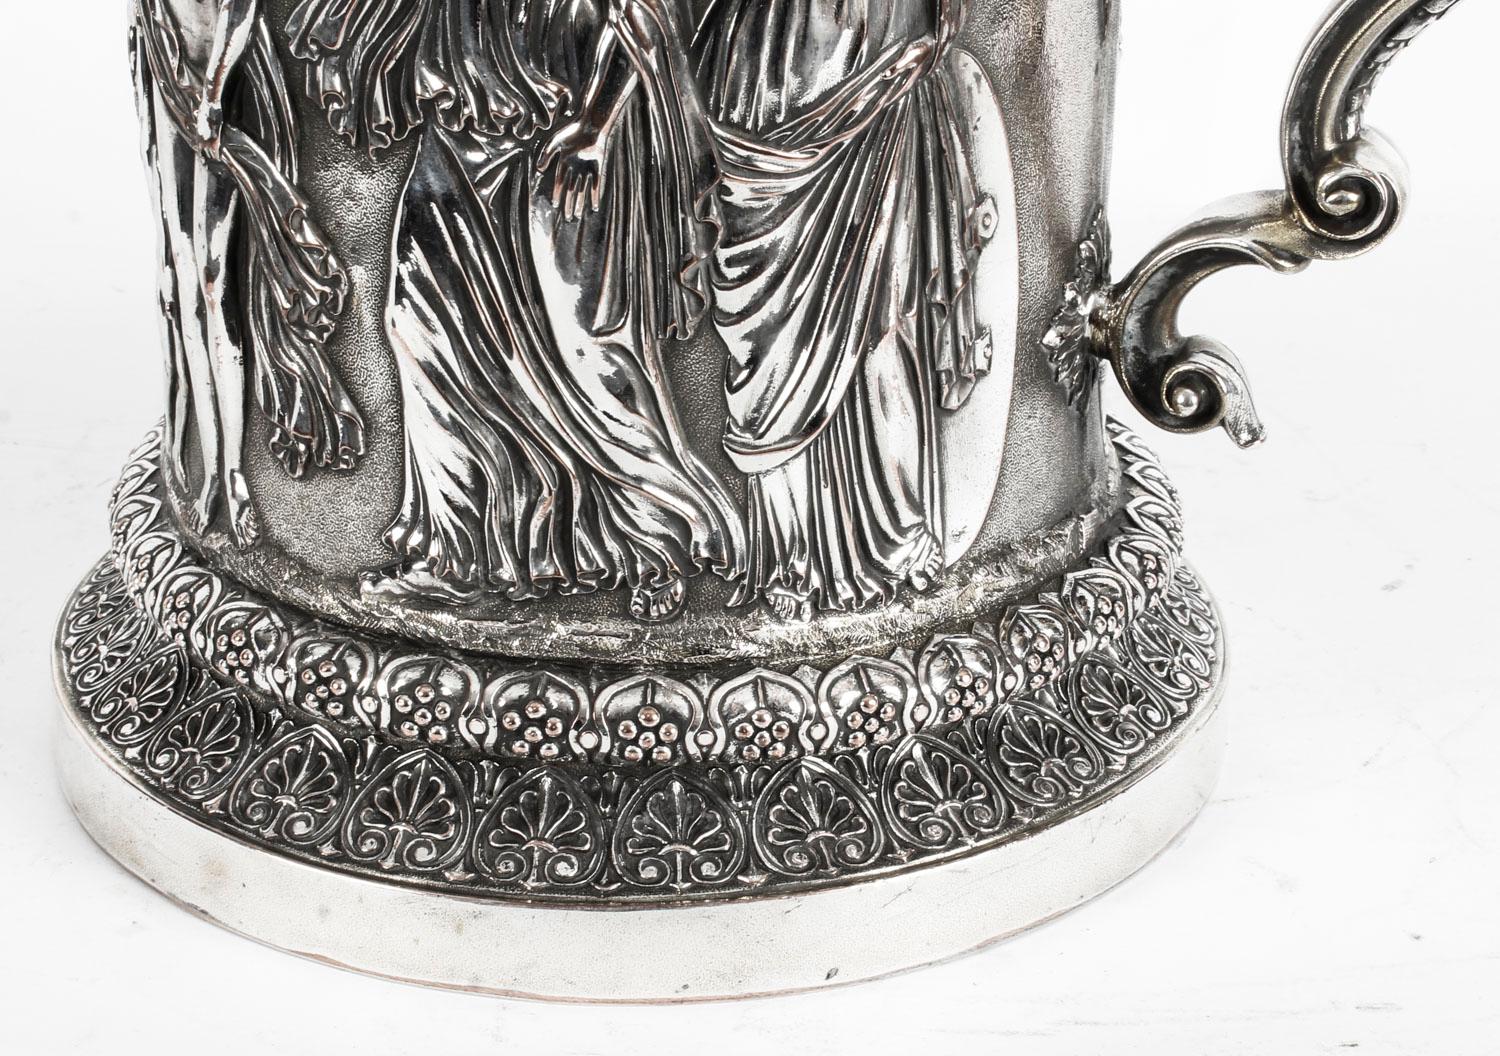 Mid-19th Century Antique Silver Plated Lidded Tankard by Elkington, 19th Century